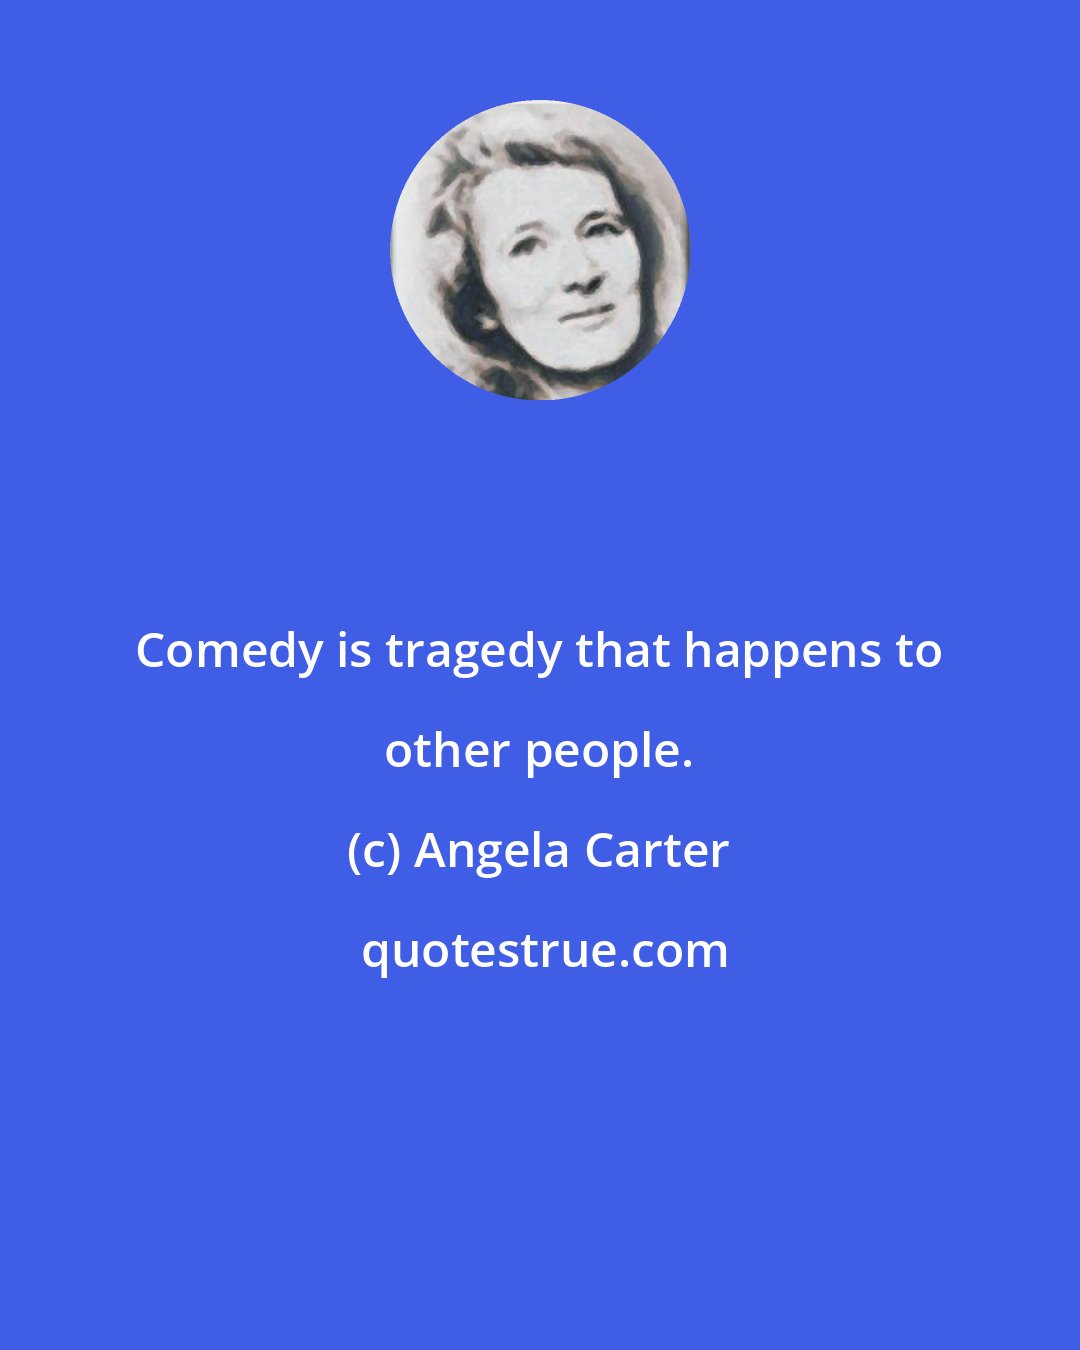 Angela Carter: Comedy is tragedy that happens to other people.